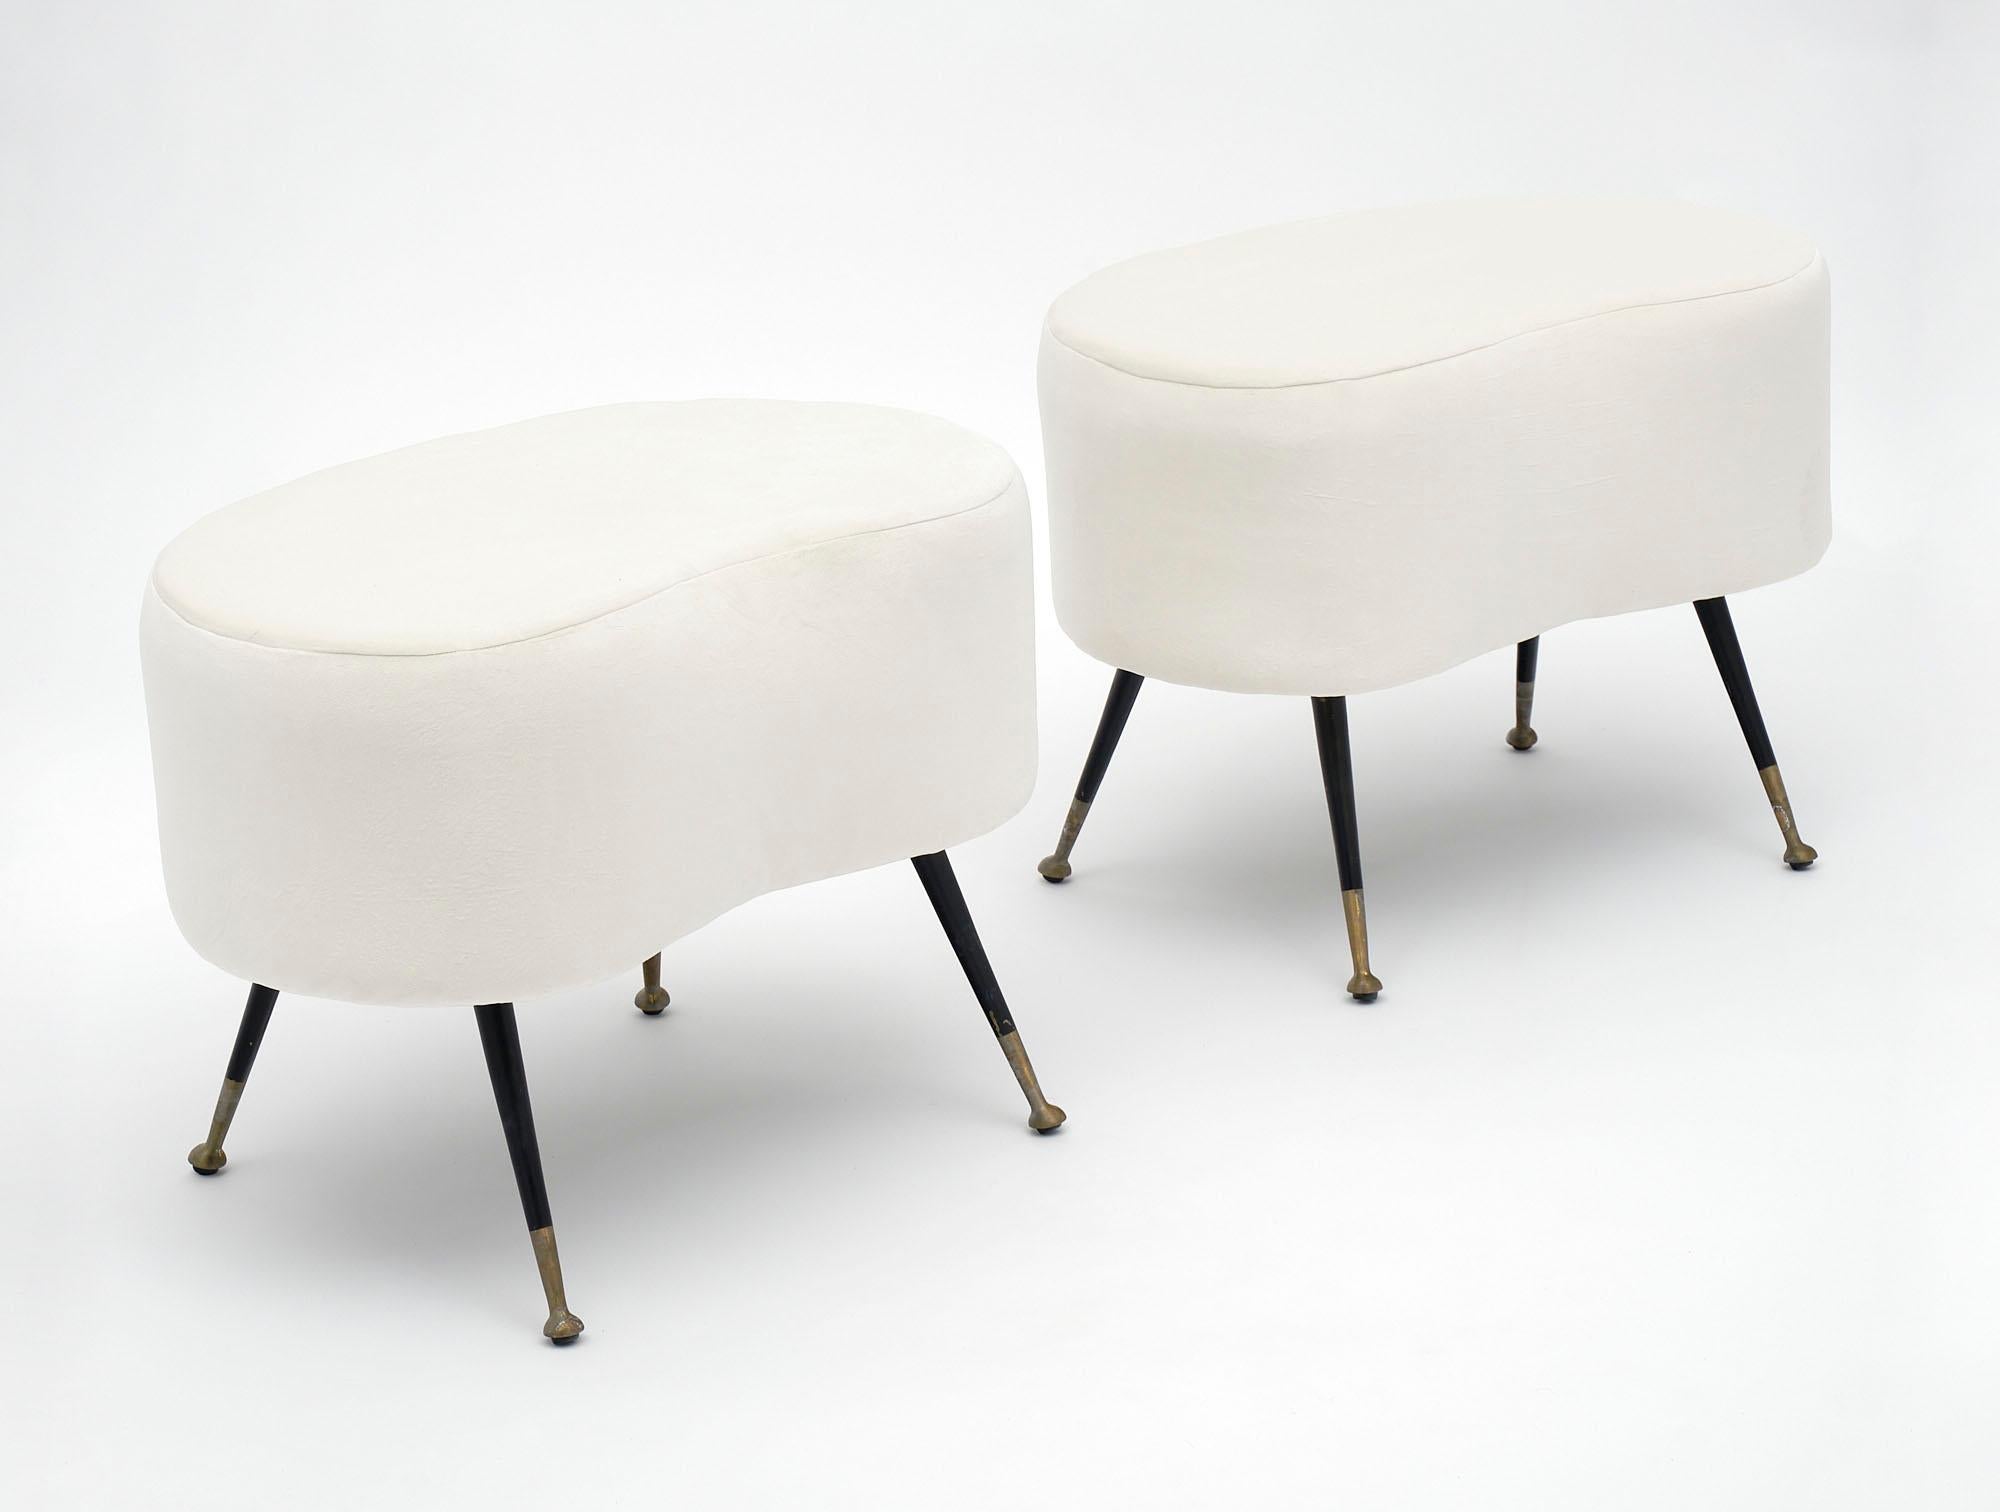 Pair of benches from Italy with black lacquered steel legs and brass feet. They have been newly upholstered in an ivory micro fiber.